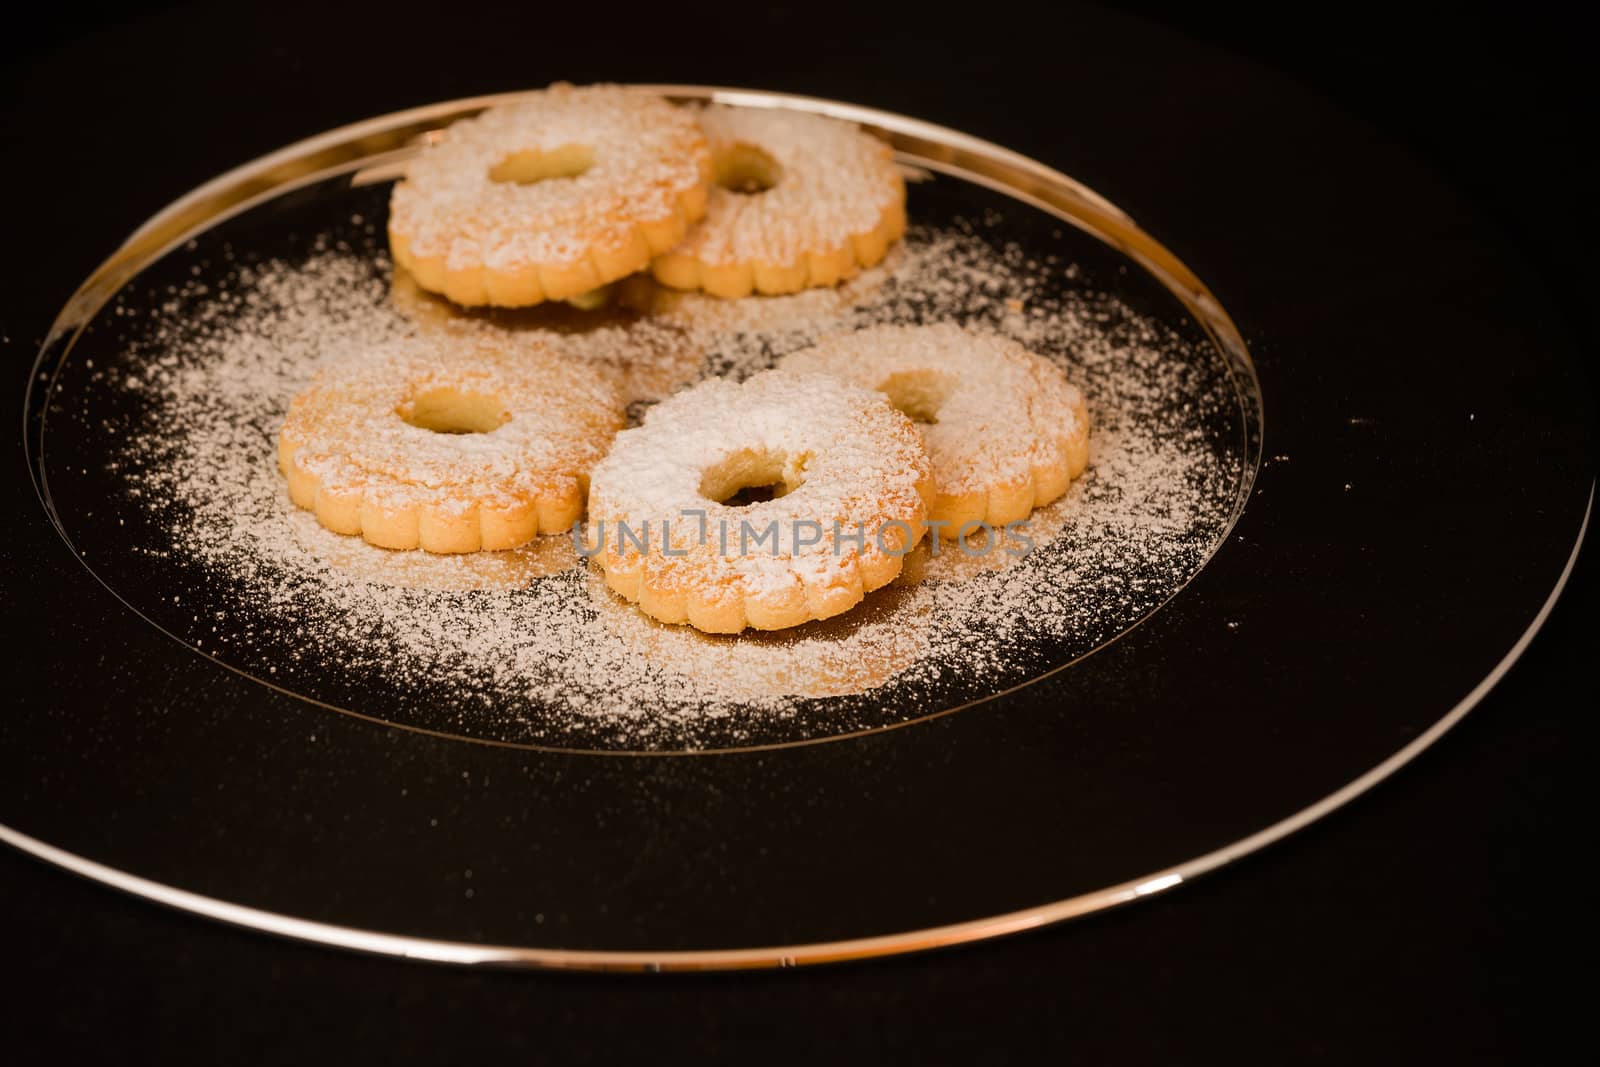 Biscuits canestrelli on a plate of steel by LuigiMorbidelli